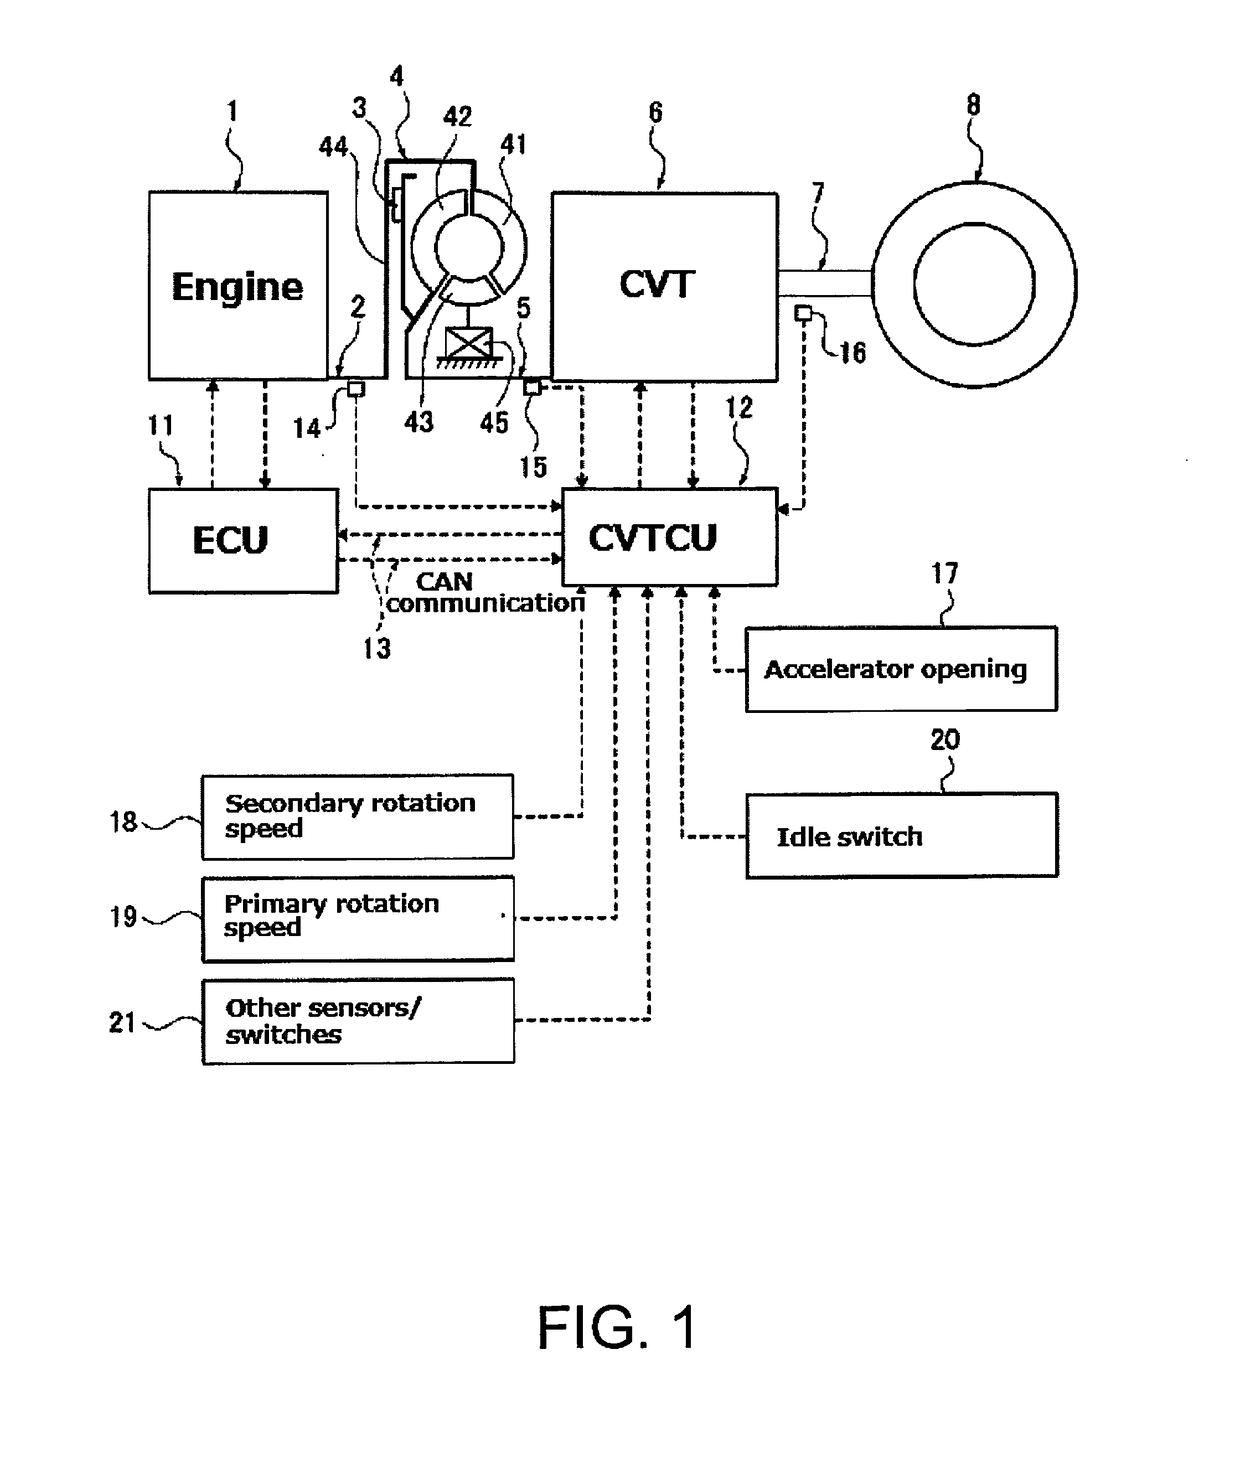 Lock-up clutch control device for vehicle